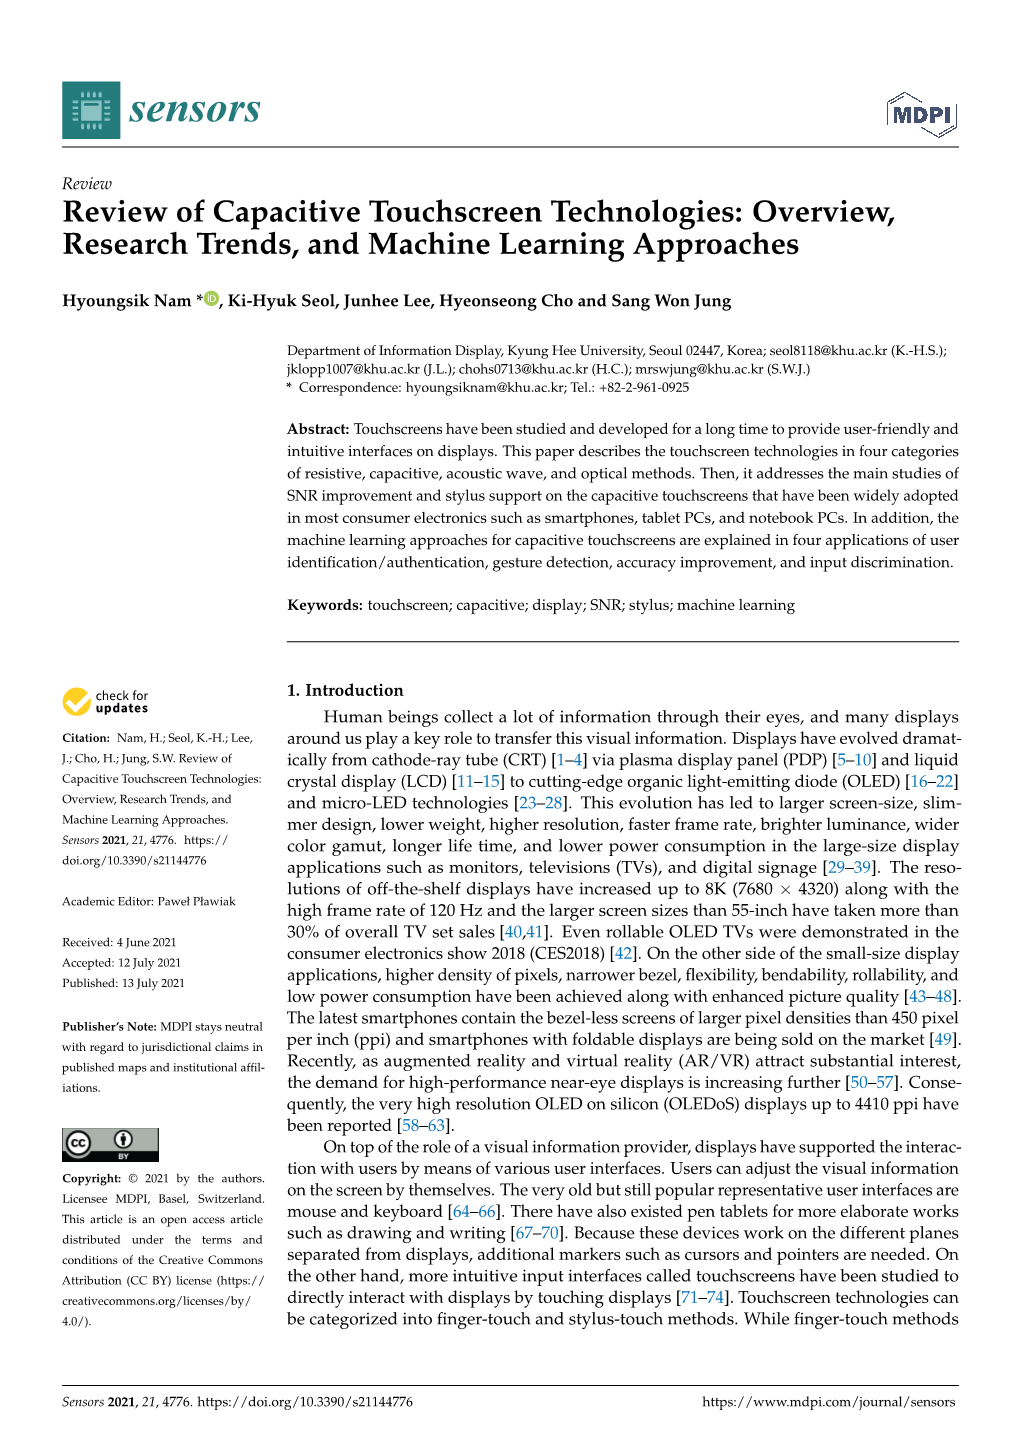 Review of Capacitive Touchscreen Technologies: Overview, Research Trends, and Machine Learning Approaches